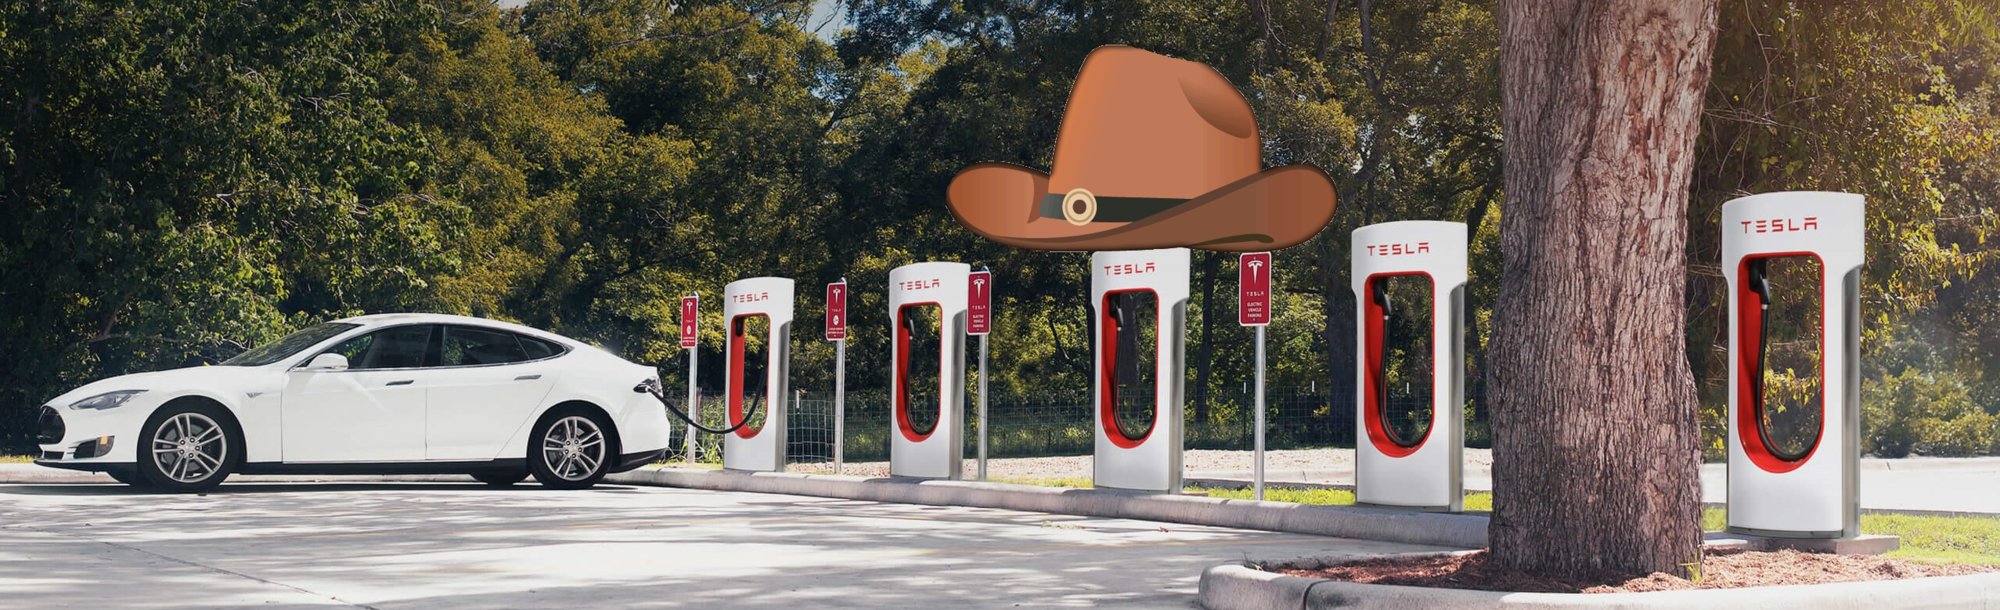 country_supercharger.jpg